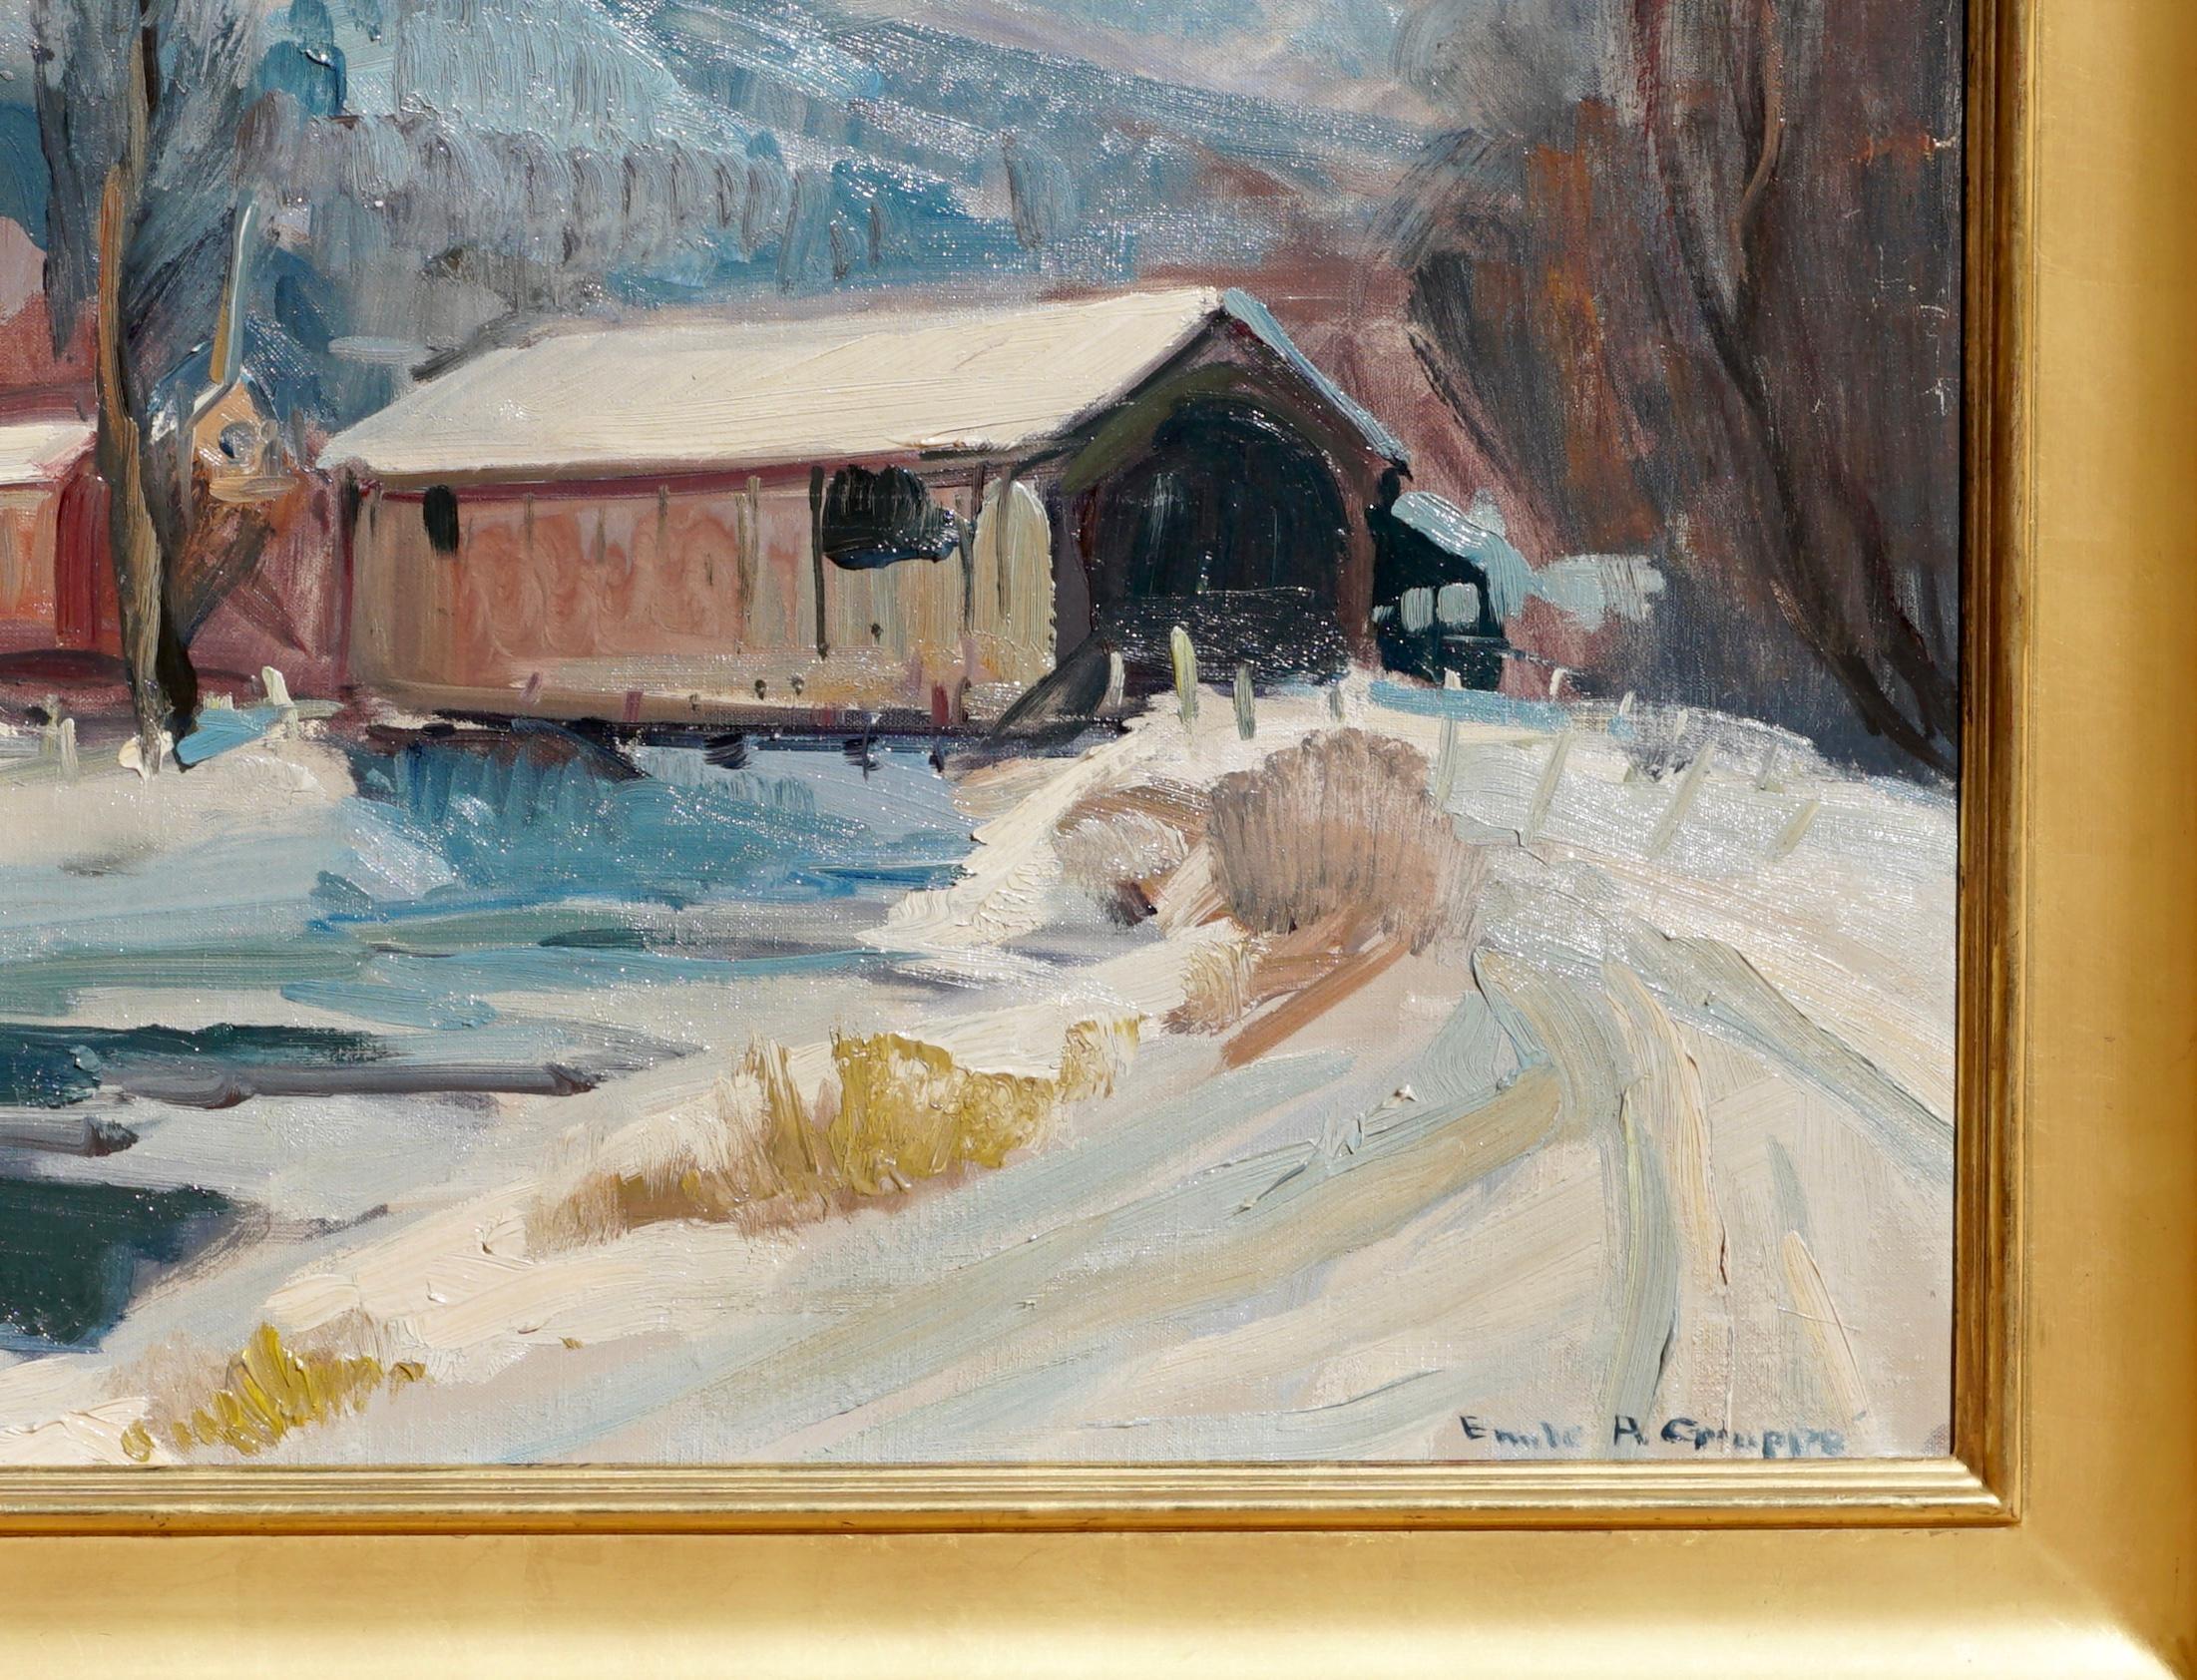 Emile Albert Gruppe 'Mass 1896-1978' “Covered Bridge” Snow Painting For Sale 4